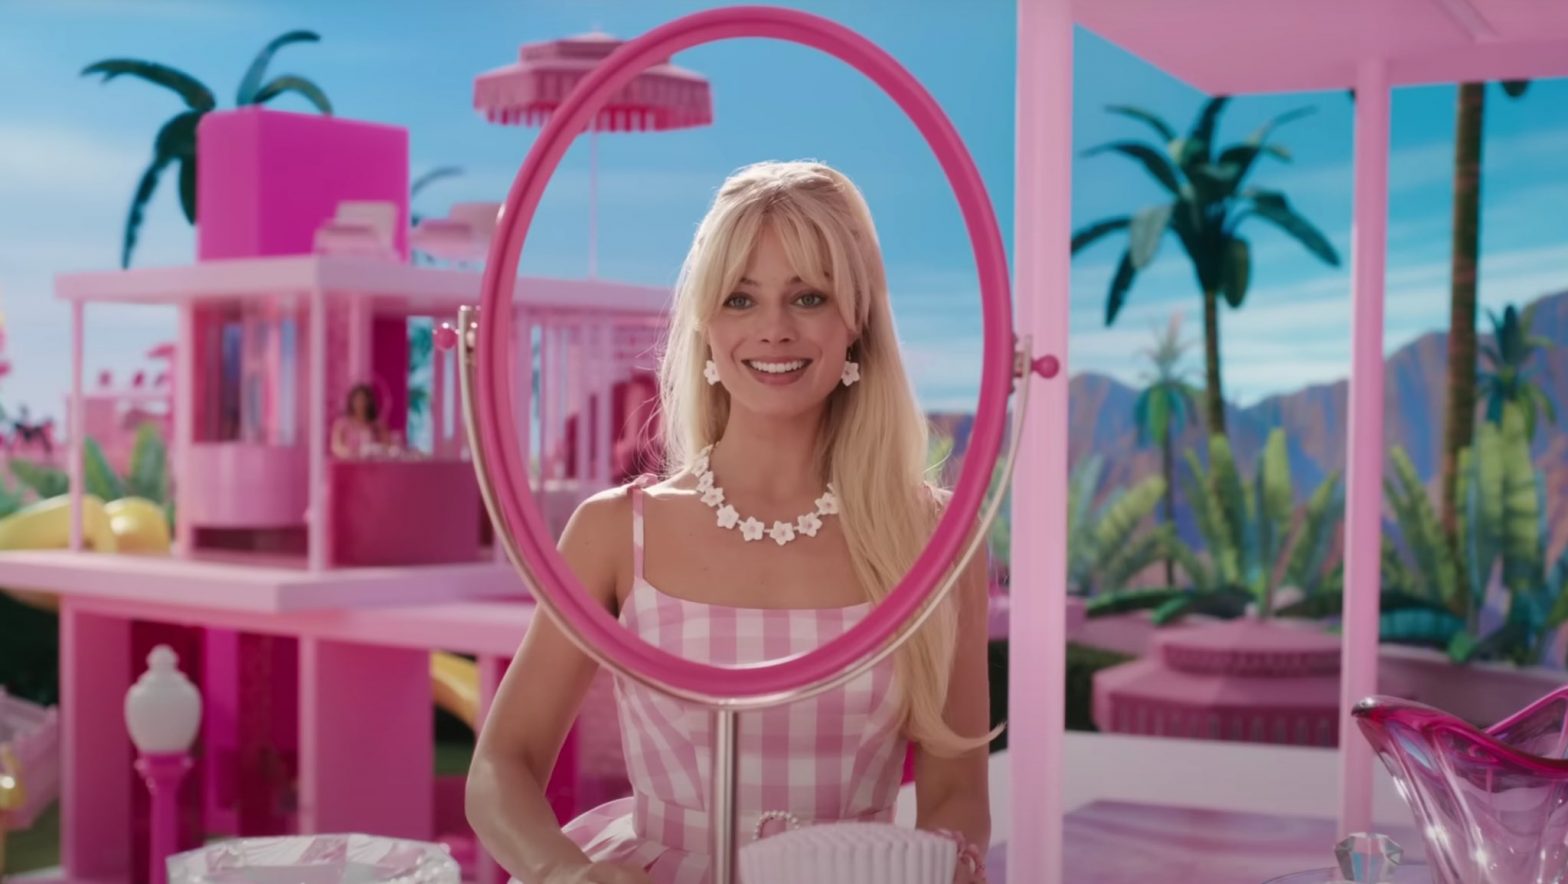 Did Margot Robbie and Ryan Gosling’s Barbie really cause a worldwide shortage of pink paint